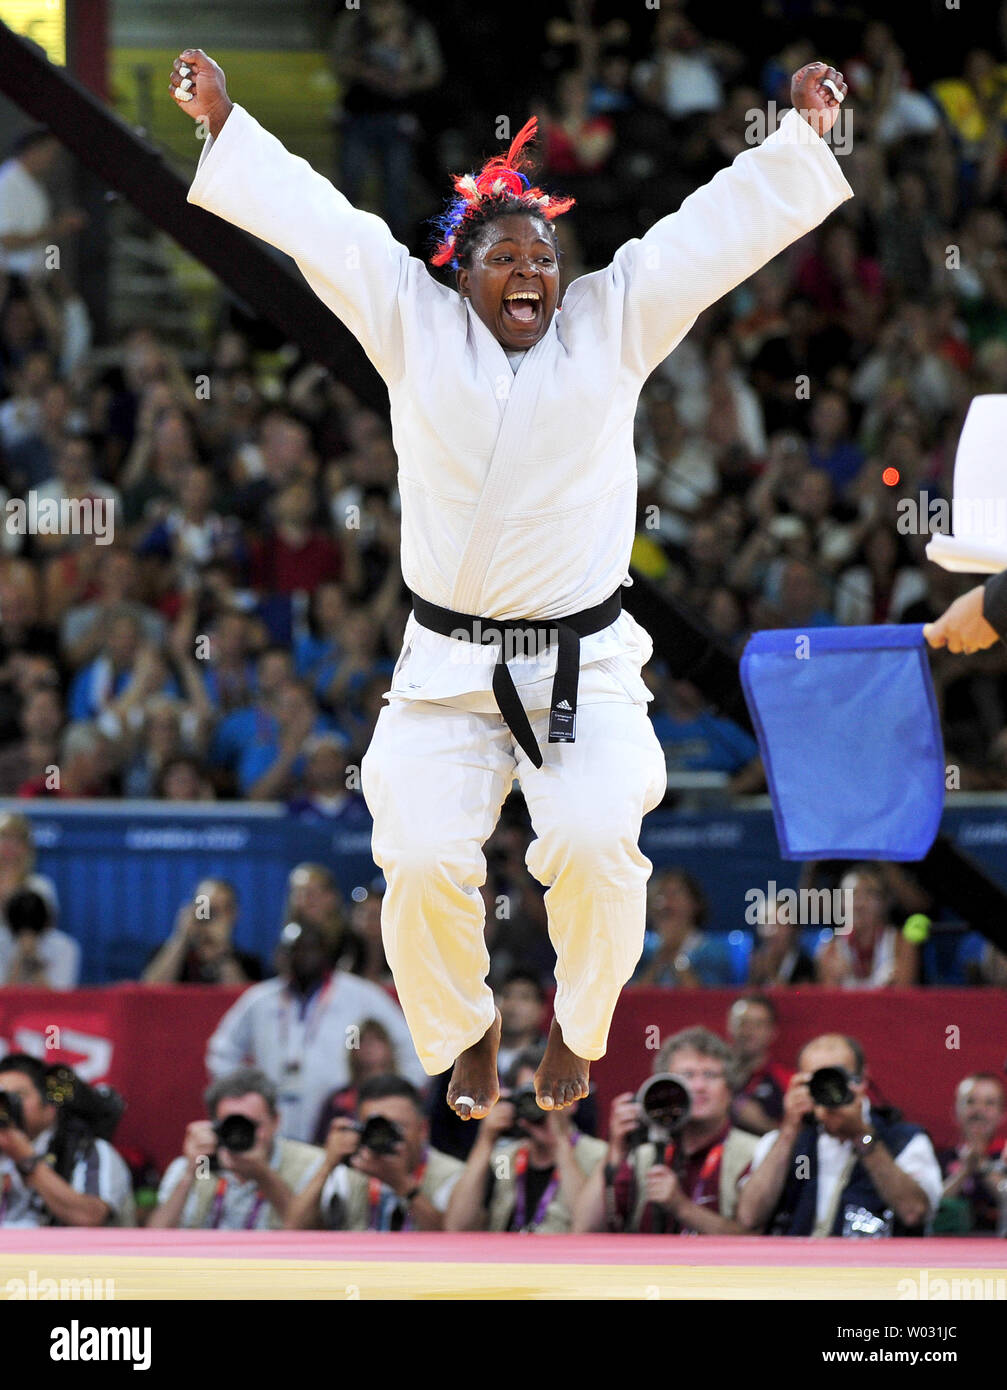 Italys Ortiz of Cuba celebrates her victory over Mika Sugimoto of Japan in the Women's 78kg Gold Medal Judo contest at the London 2012 Summer Olympics on August 3, 2012 in London. UPI/Ron Sachs Stock Photo